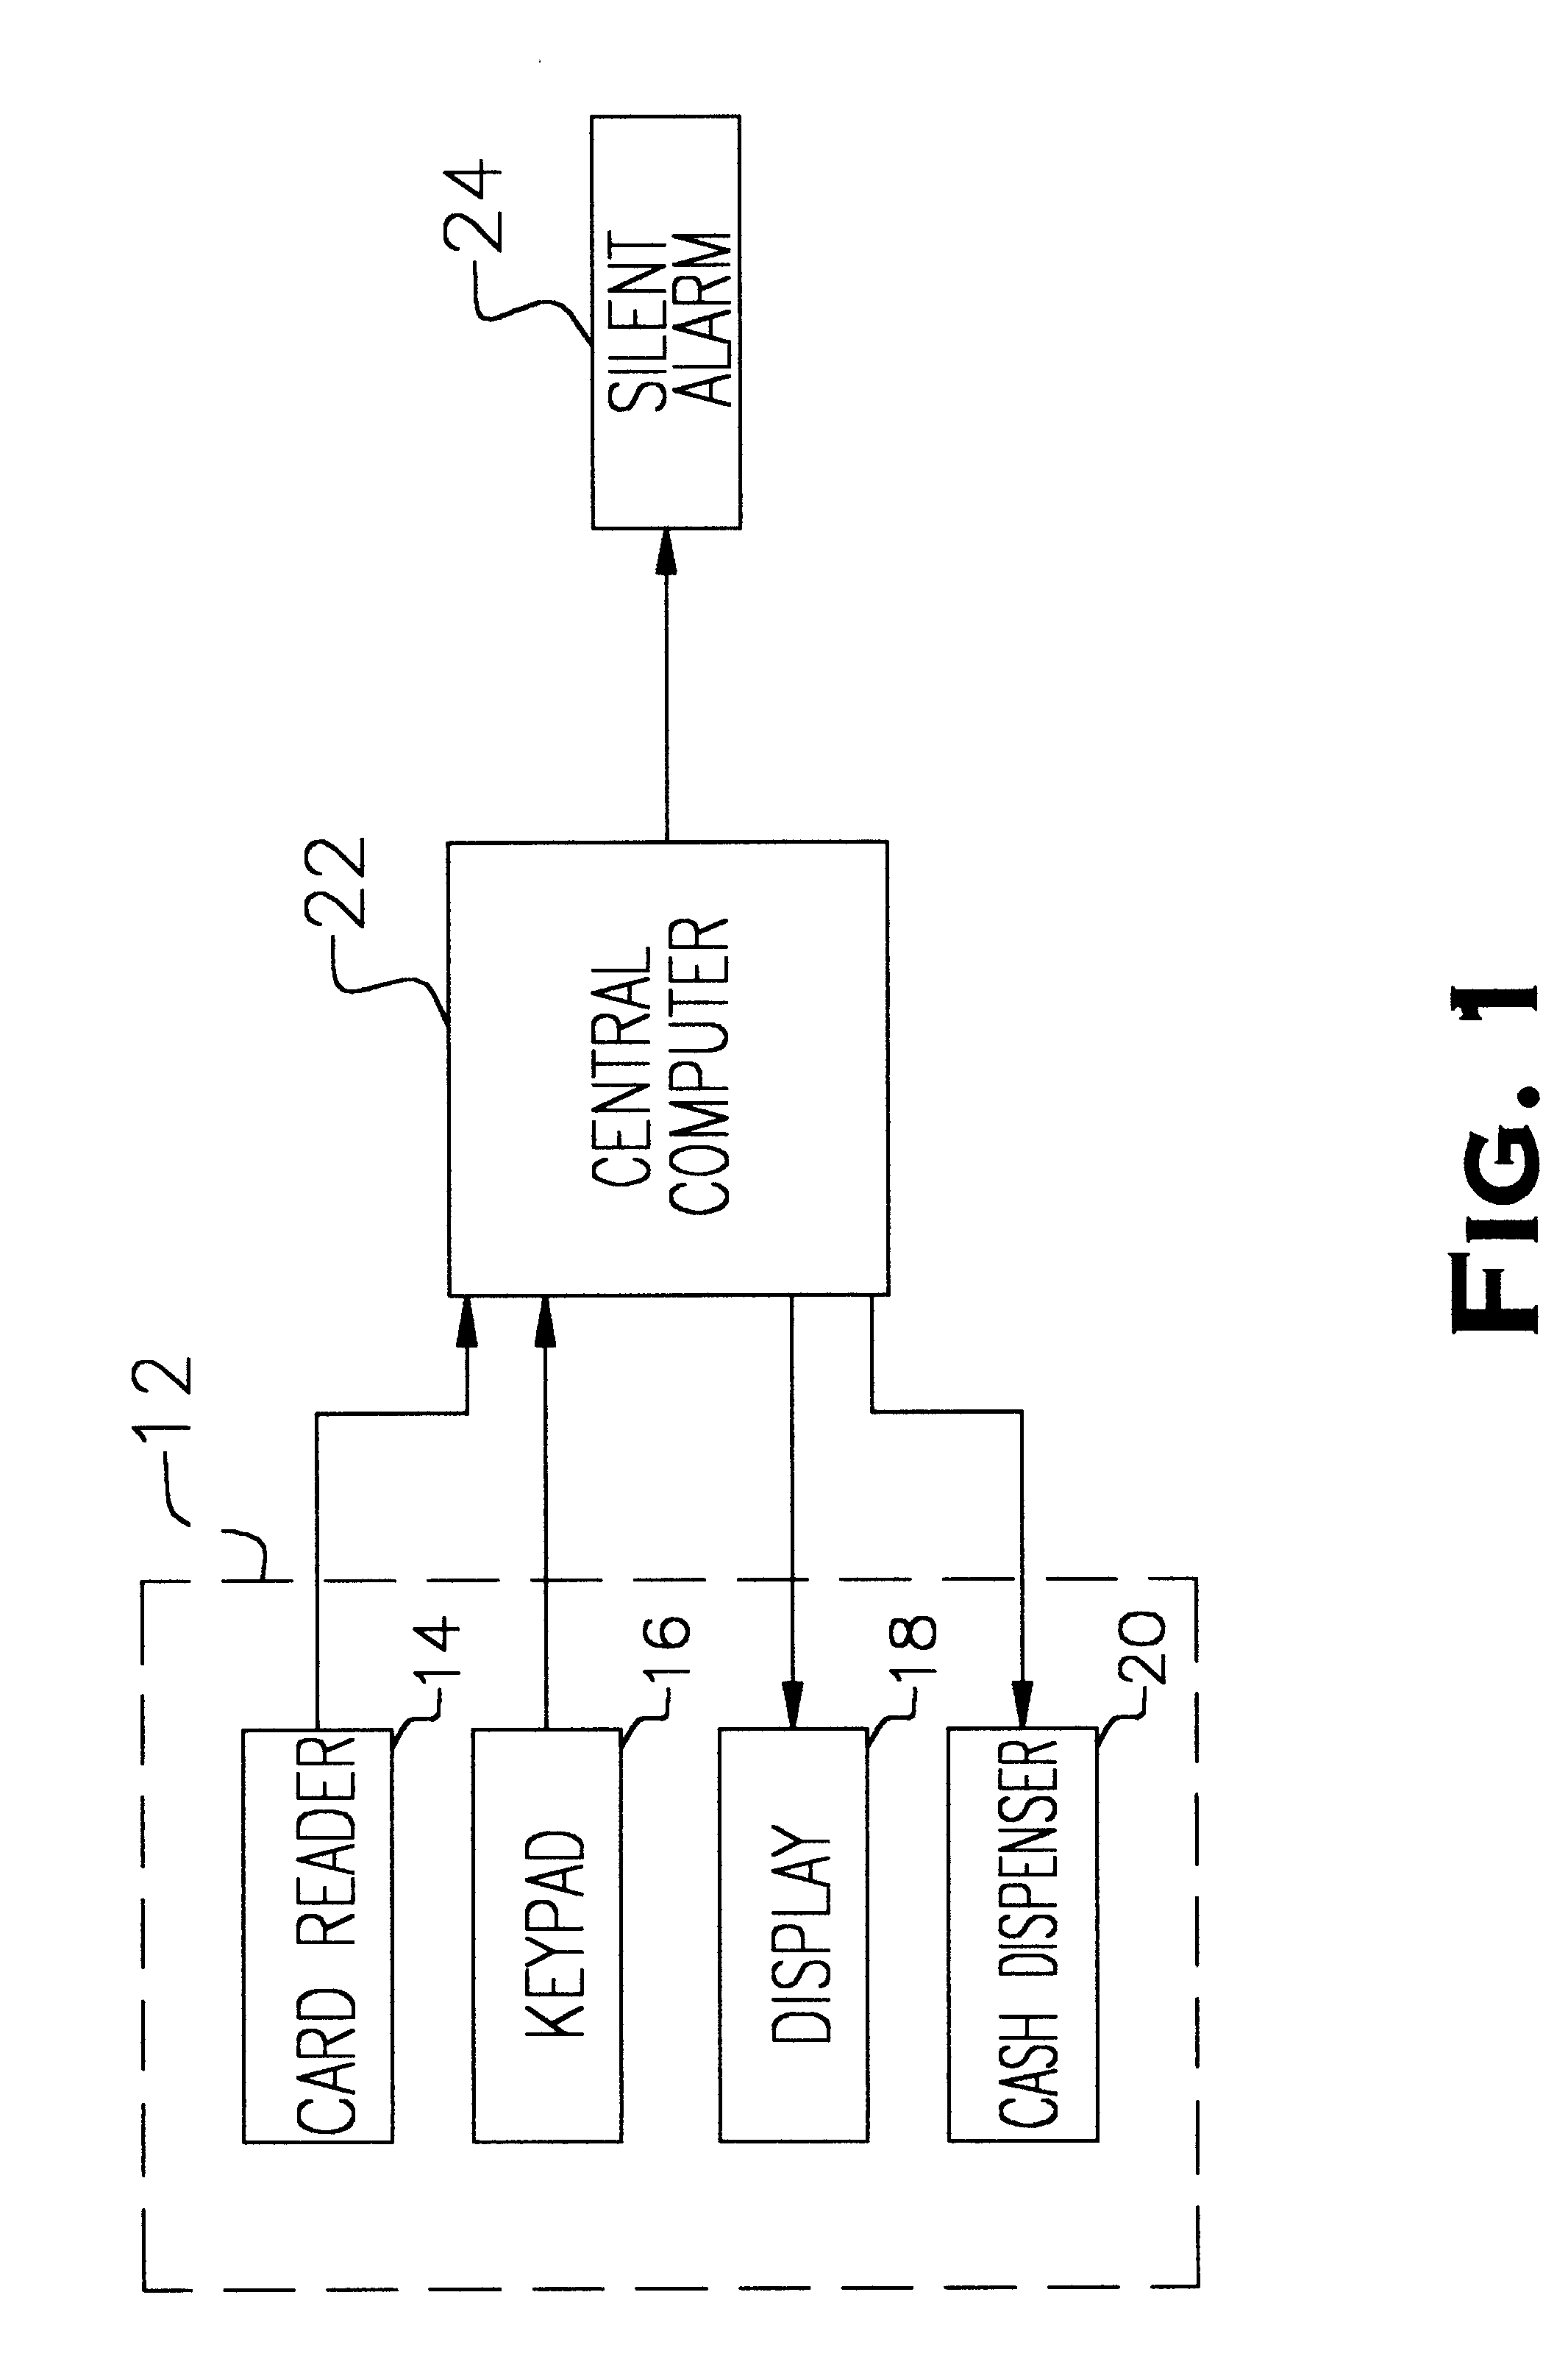 Computerized password verification system and method for ATM transactions